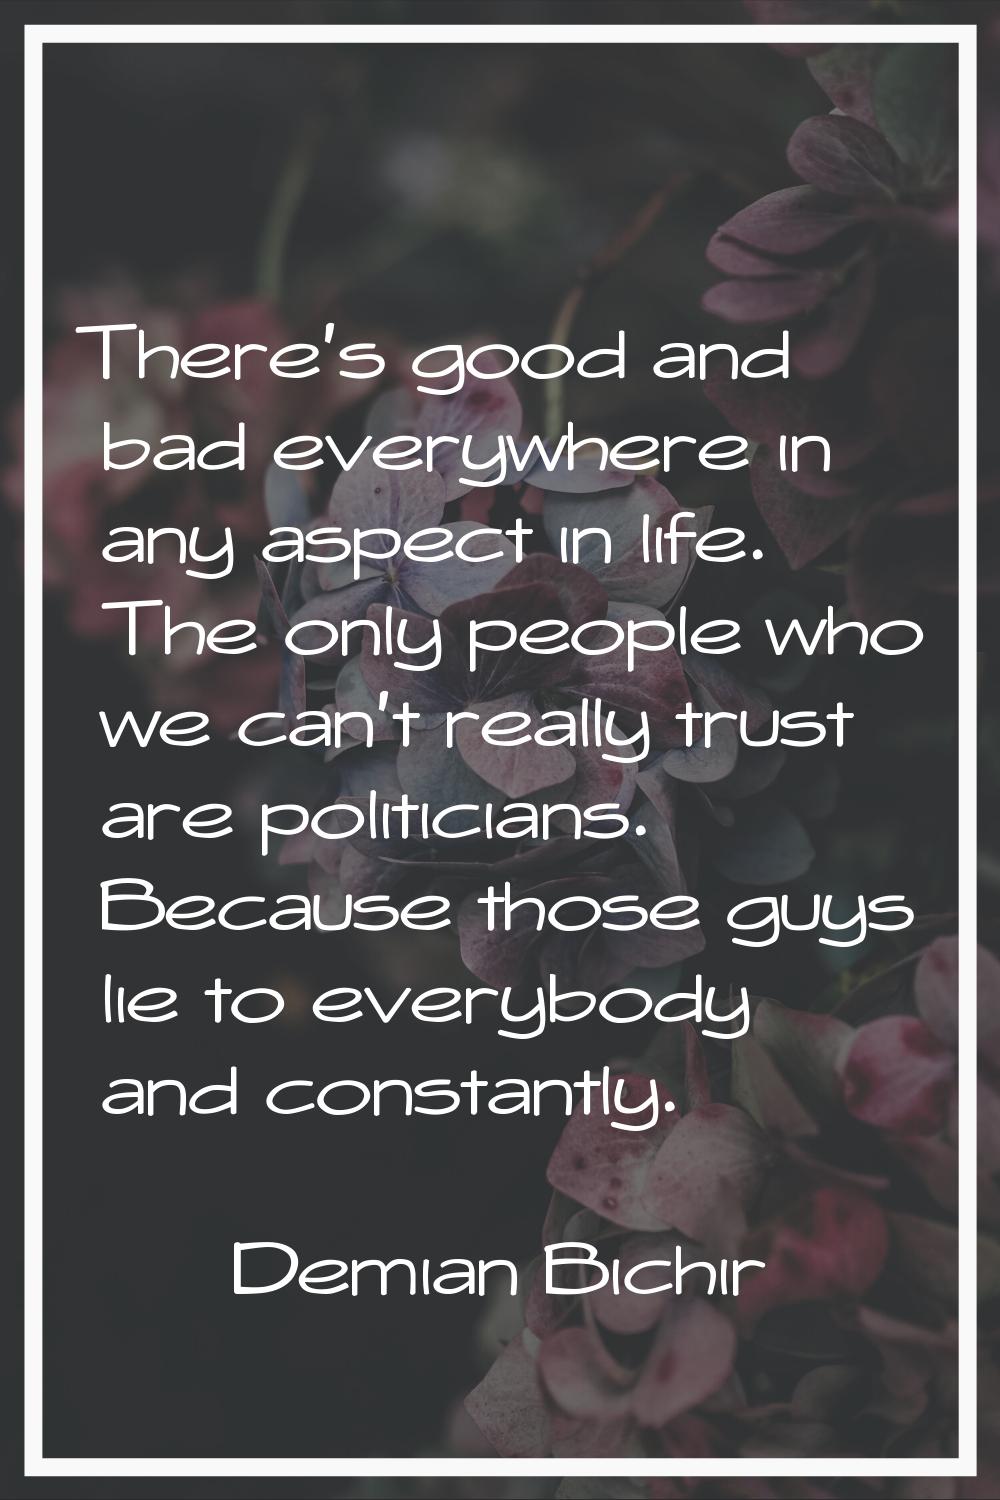 There's good and bad everywhere in any aspect in life. The only people who we can't really trust ar